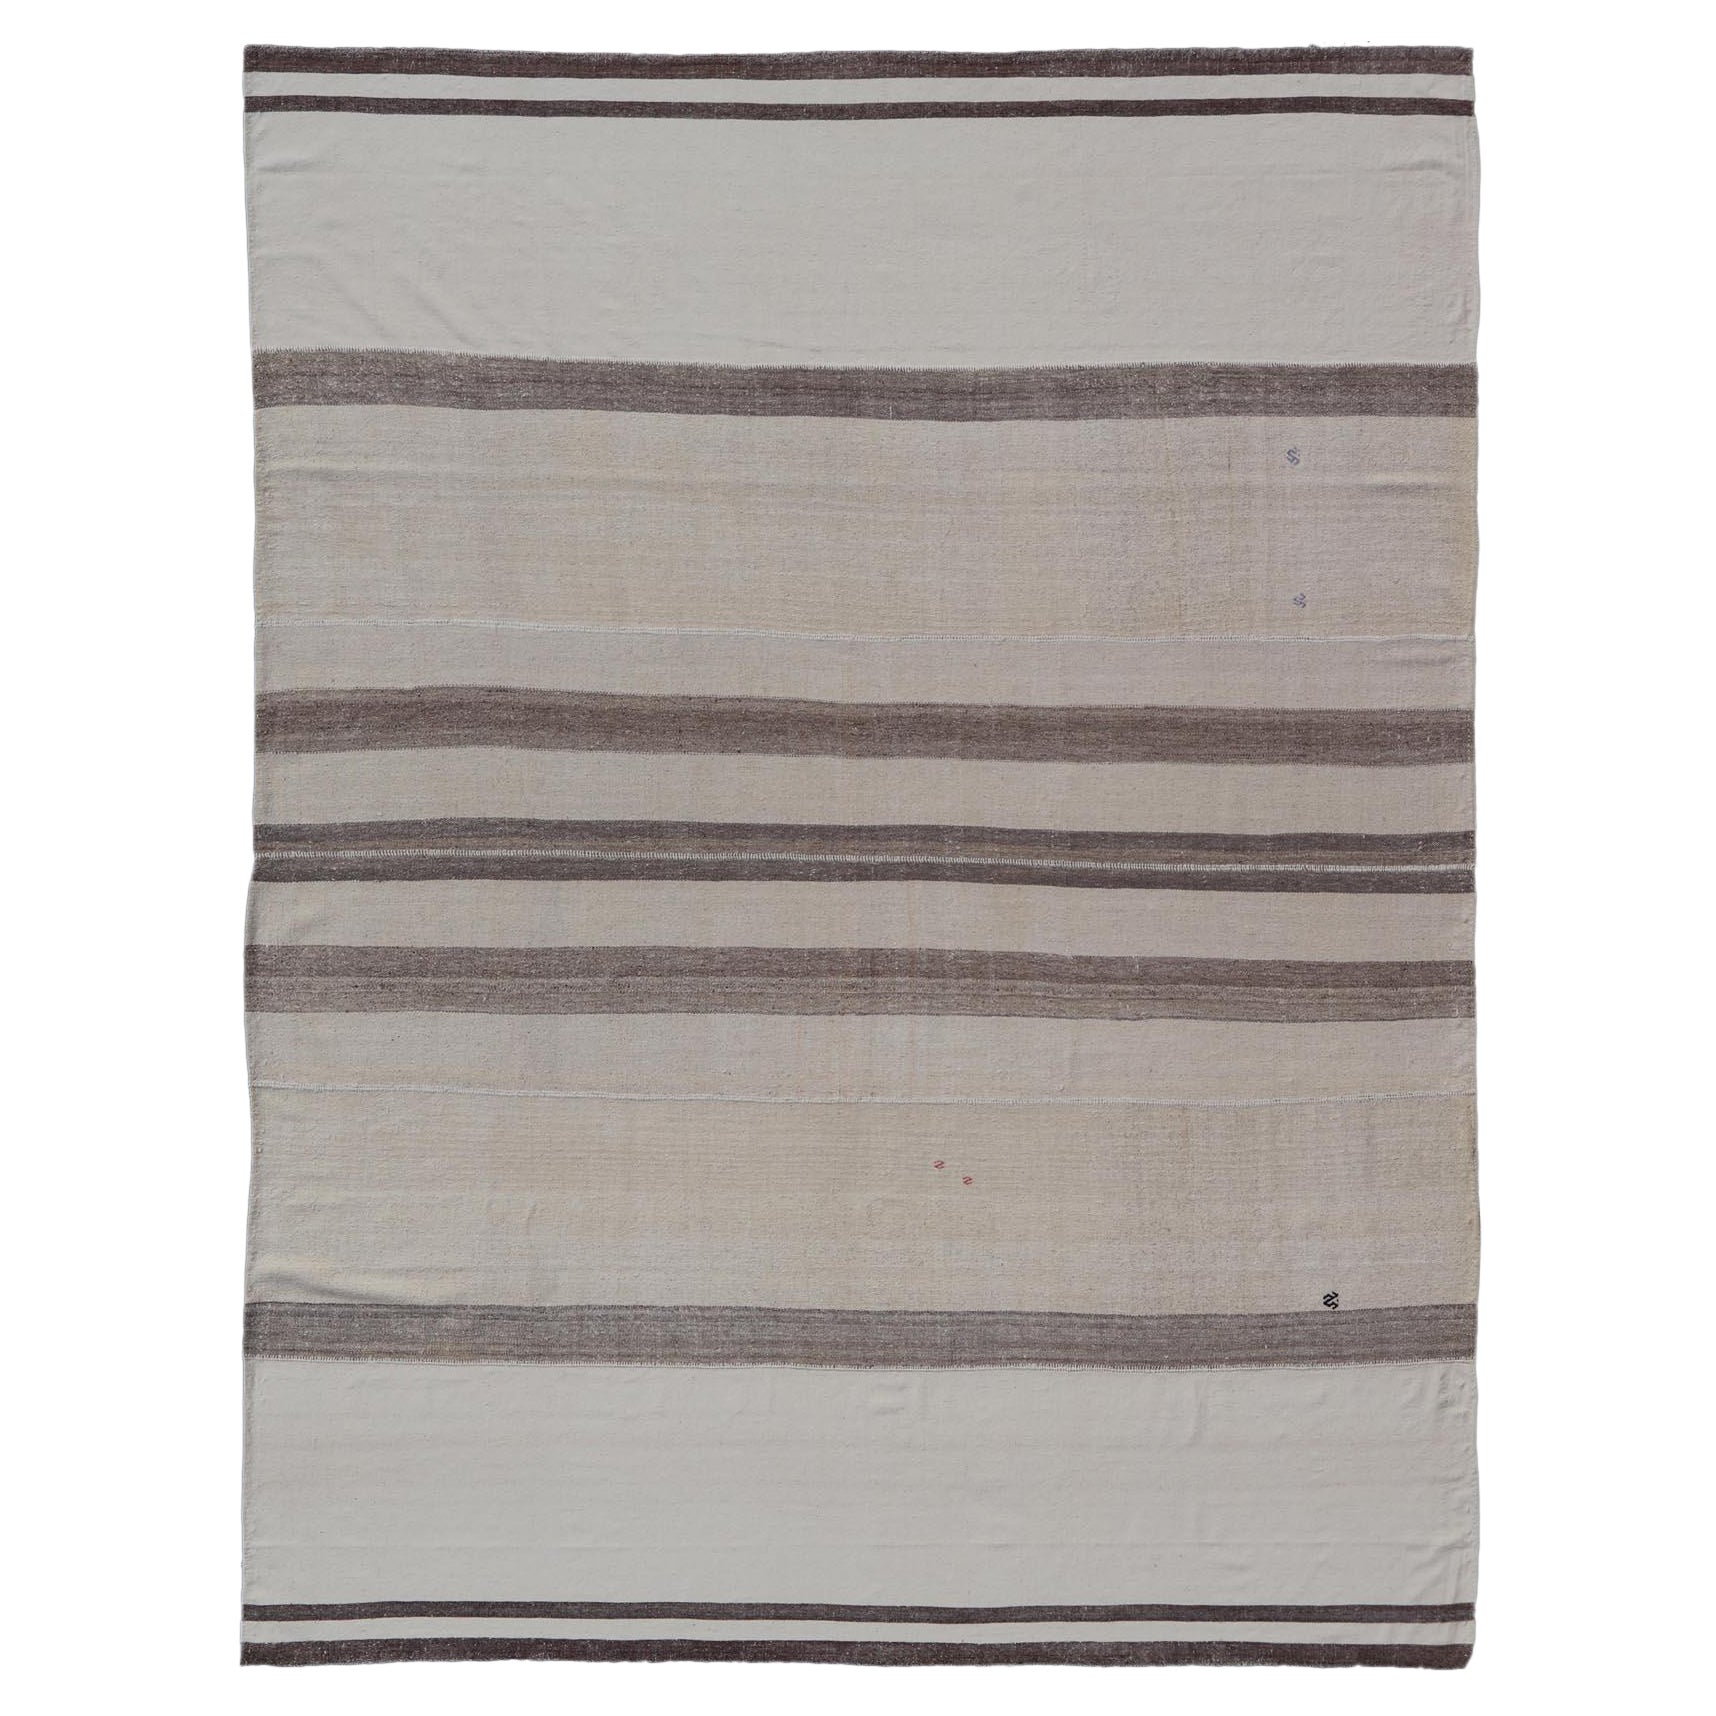 Large Vintage Turkish Kilim Rug with Stripes in Brown, White and Cream For Sale